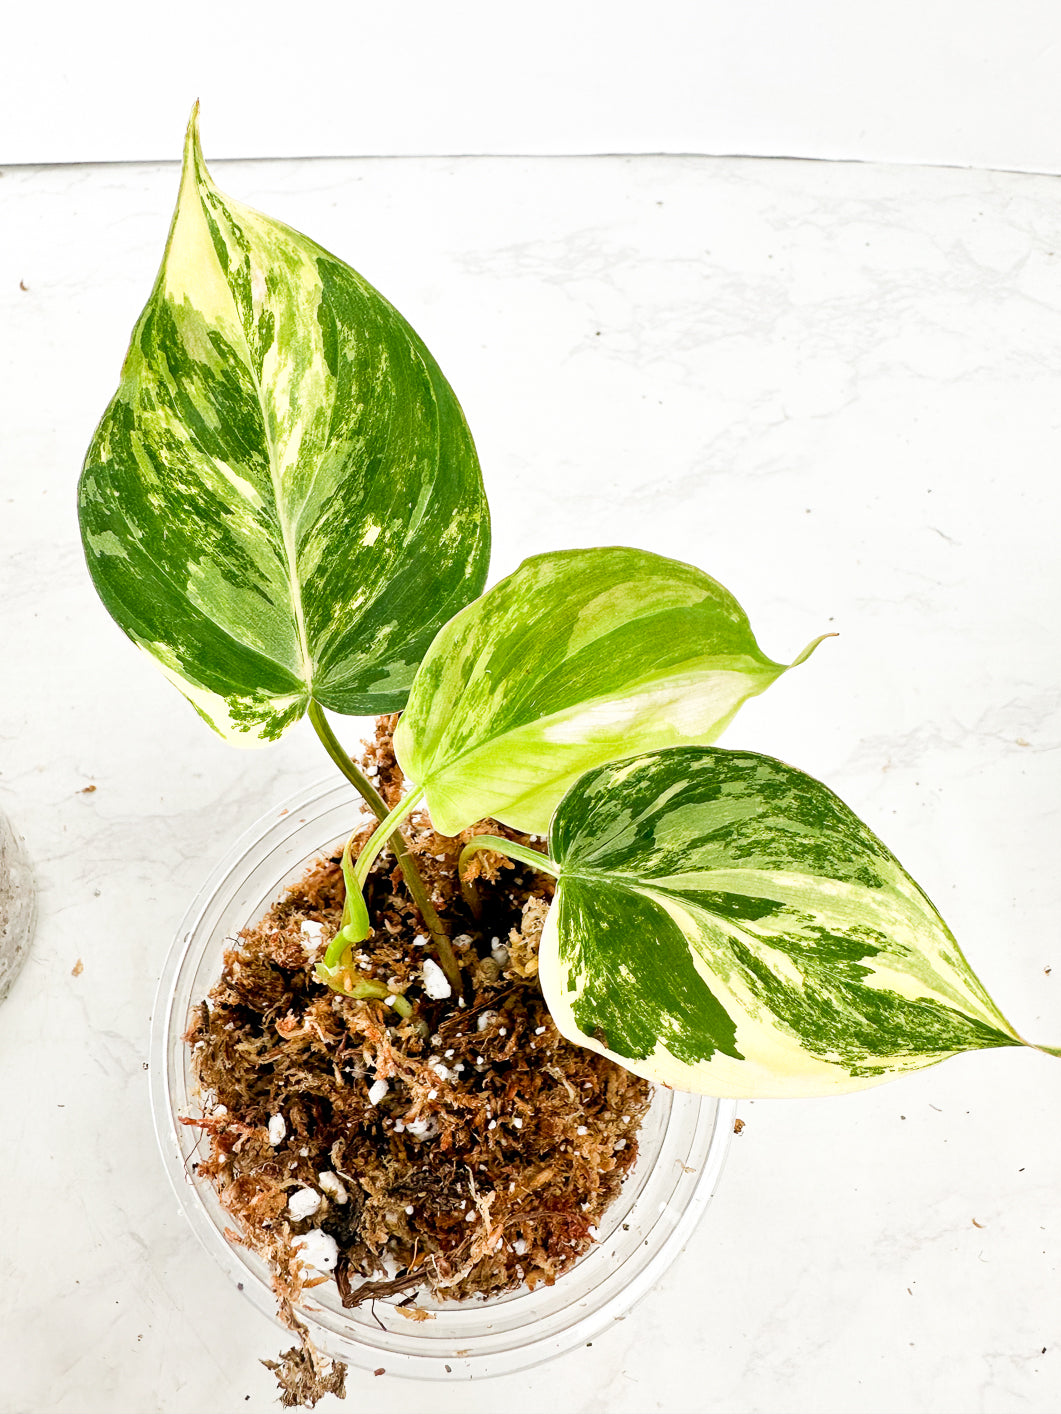 Philondendron Micans Aurea Variegated Rooting 1 leaf 1 sprout